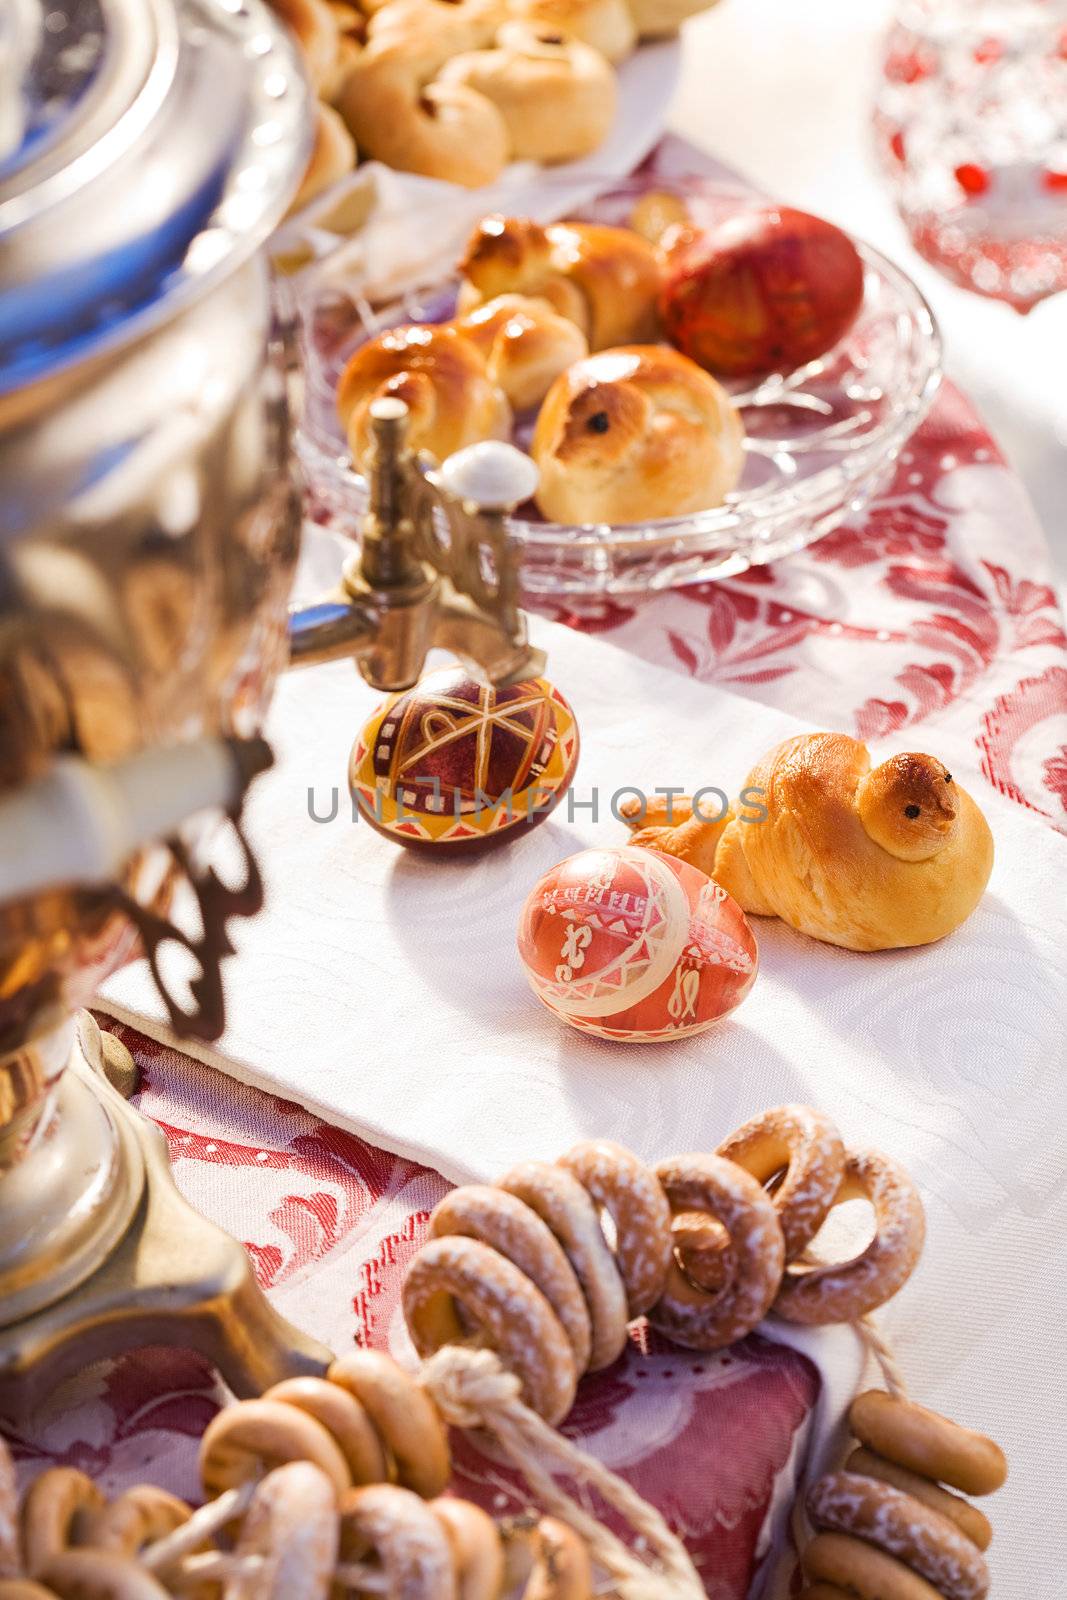 Samovar end sweets by Gravicapa